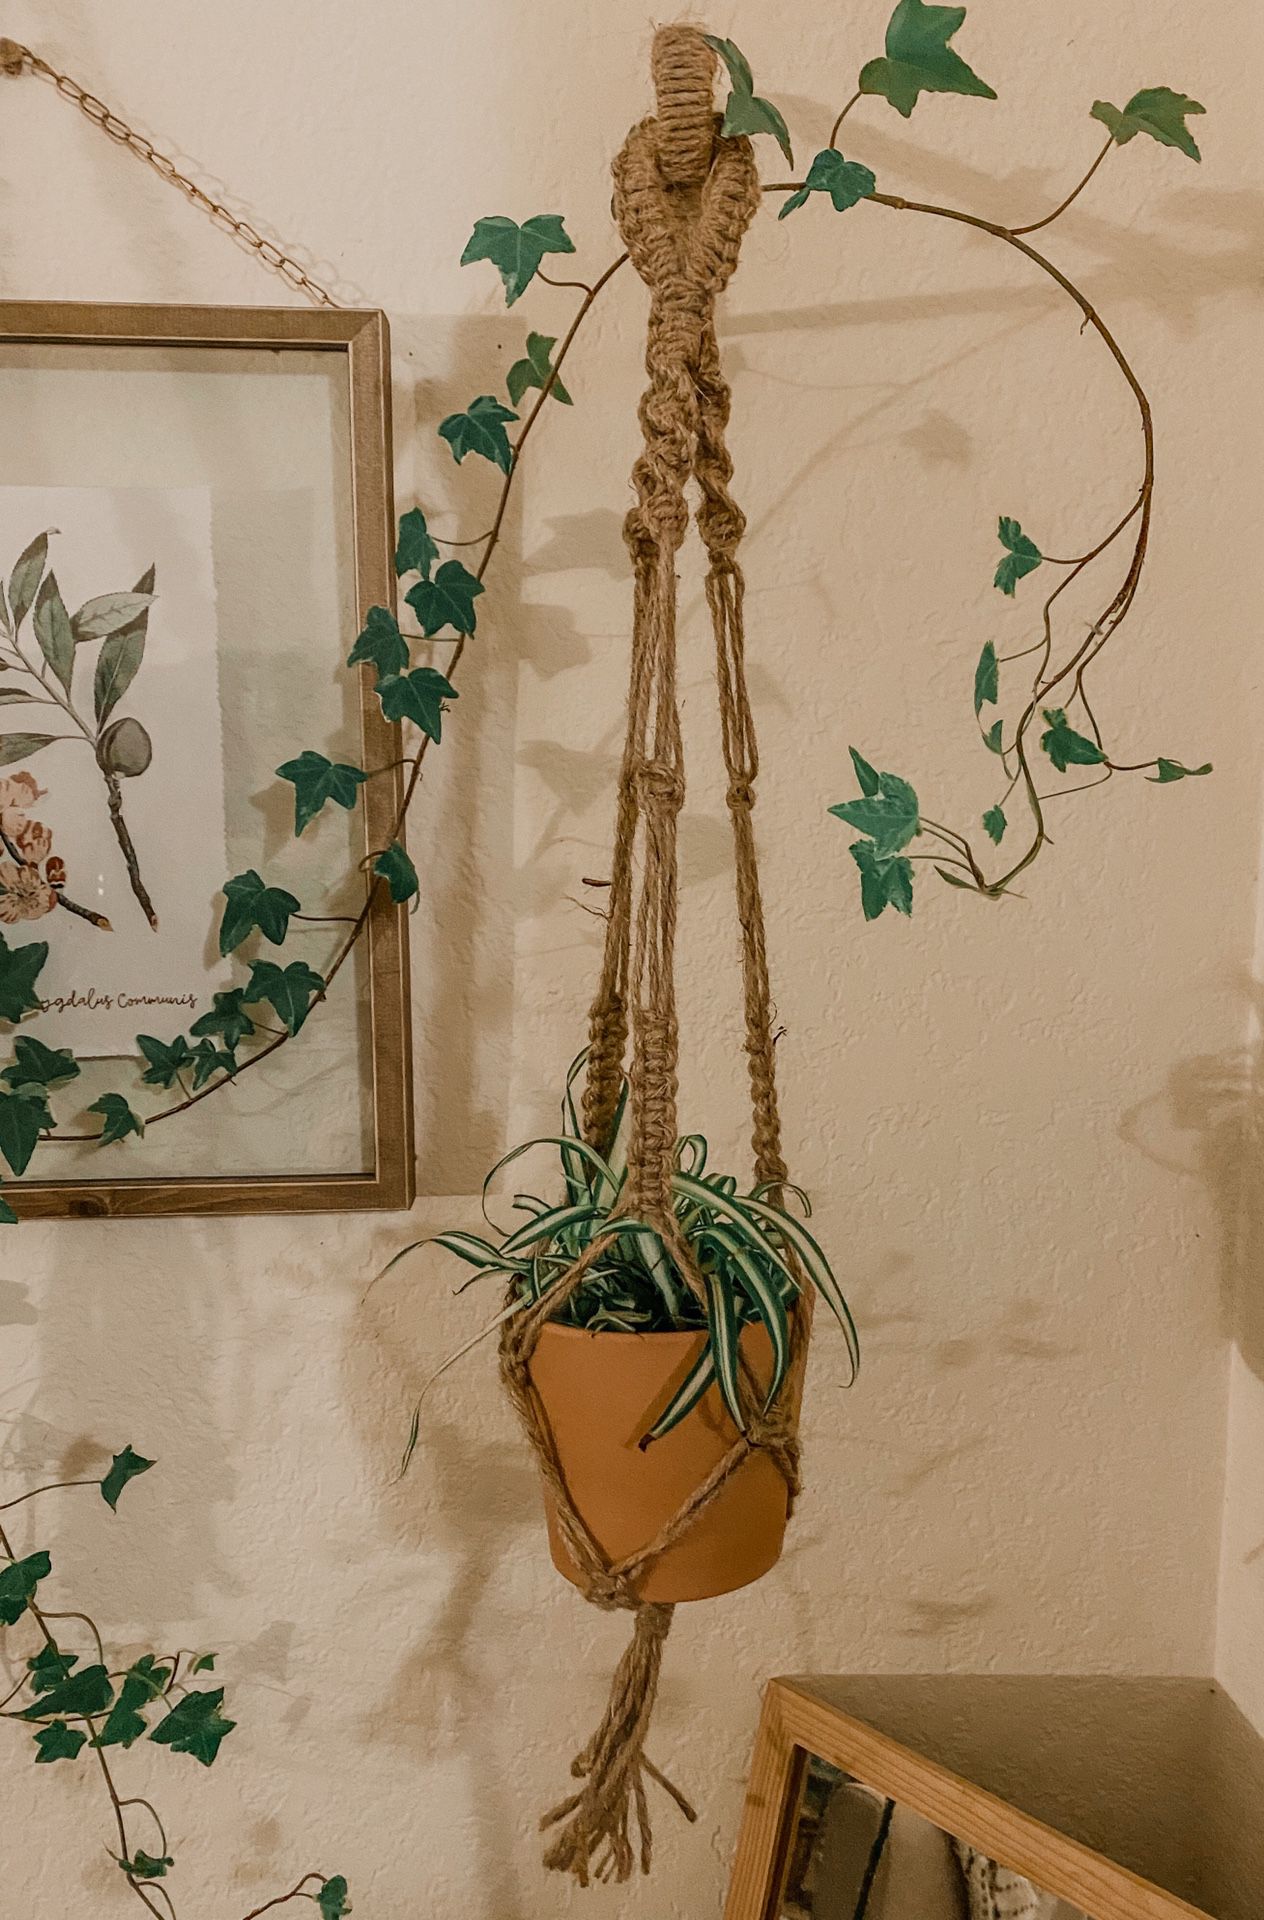 Spider plant in a 4” clay pot with macrame plant holder